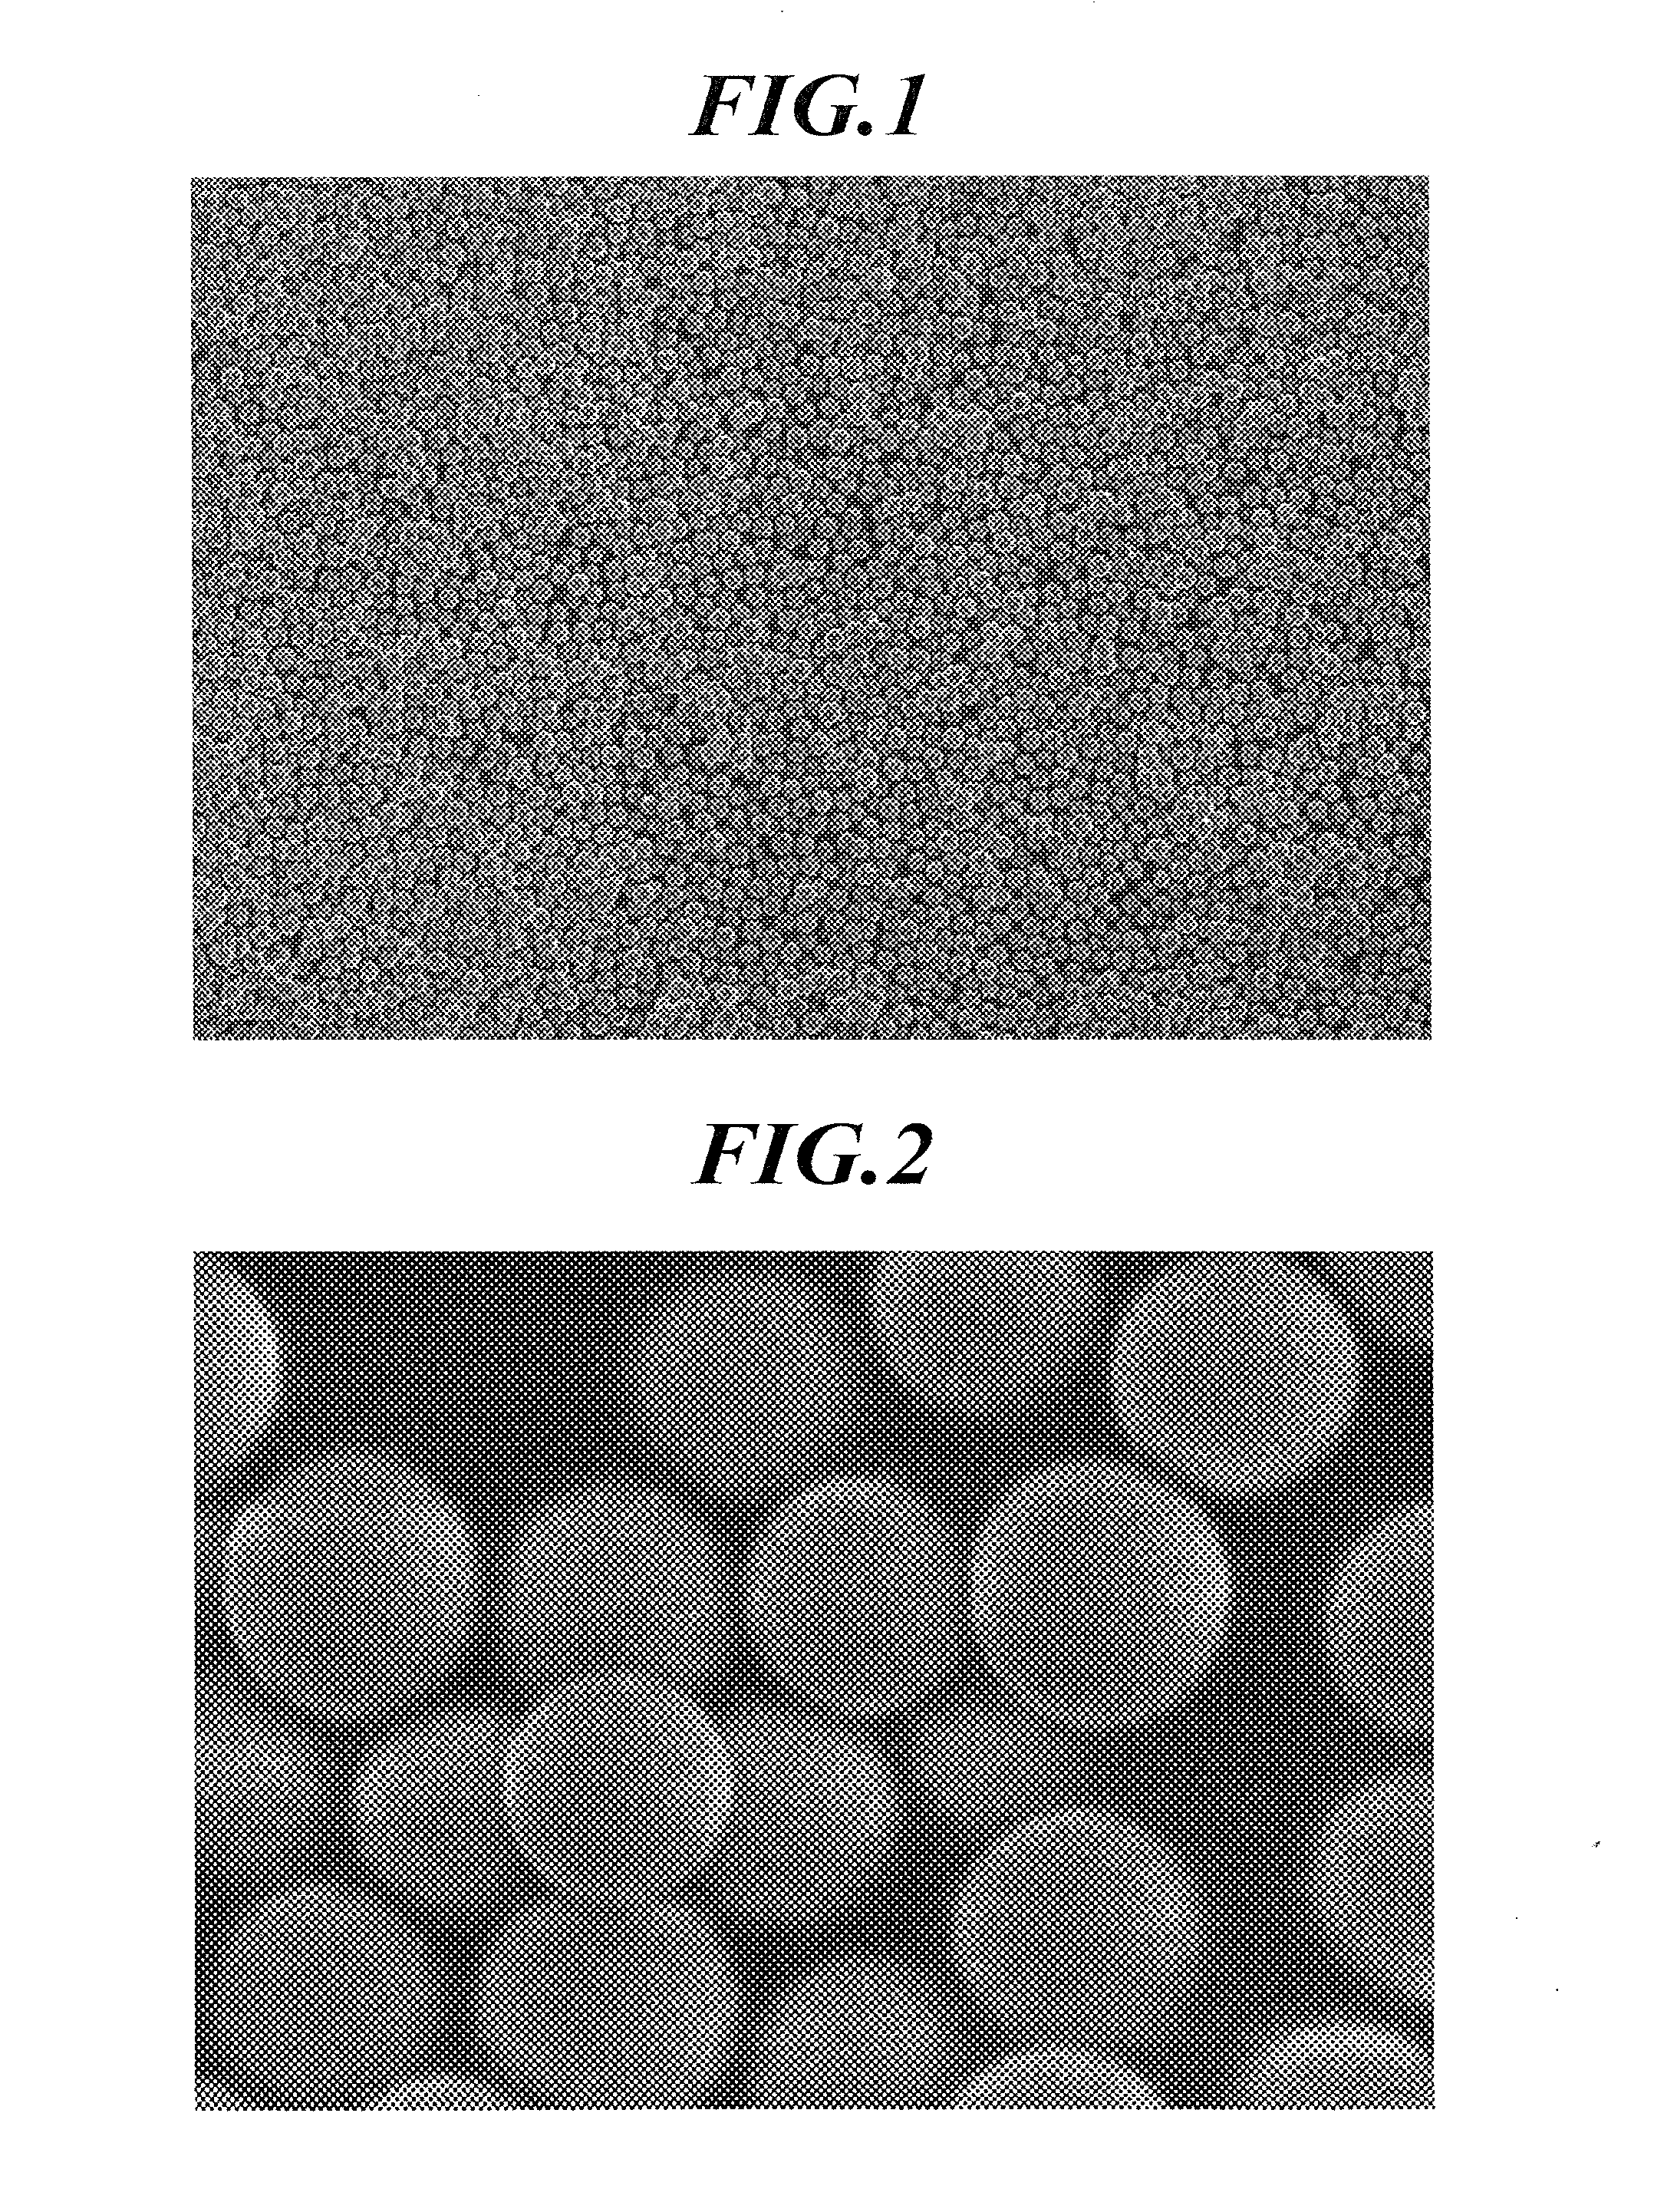 Polishing Material Particles, Method For Producing Polishing Material, And Polishing Processing Method